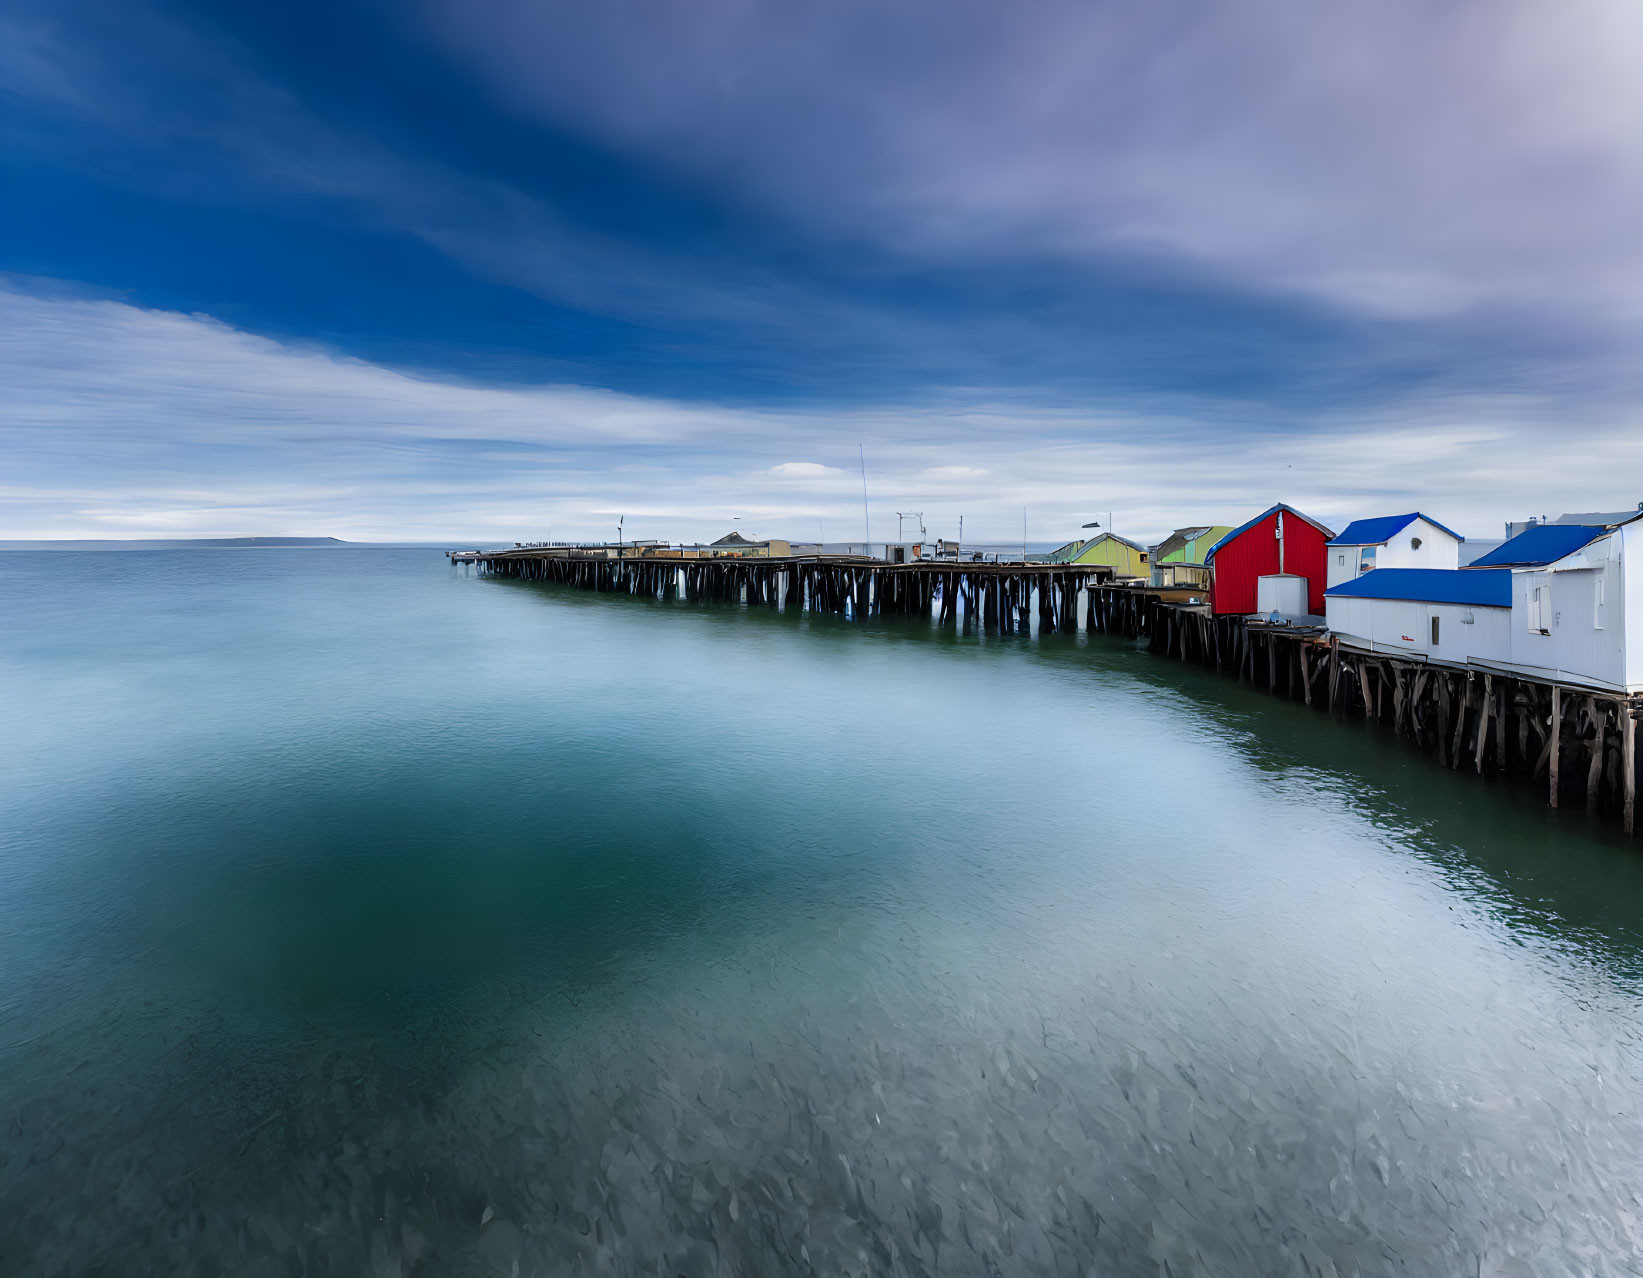 Colorful houses on wooden pier in serene seascape